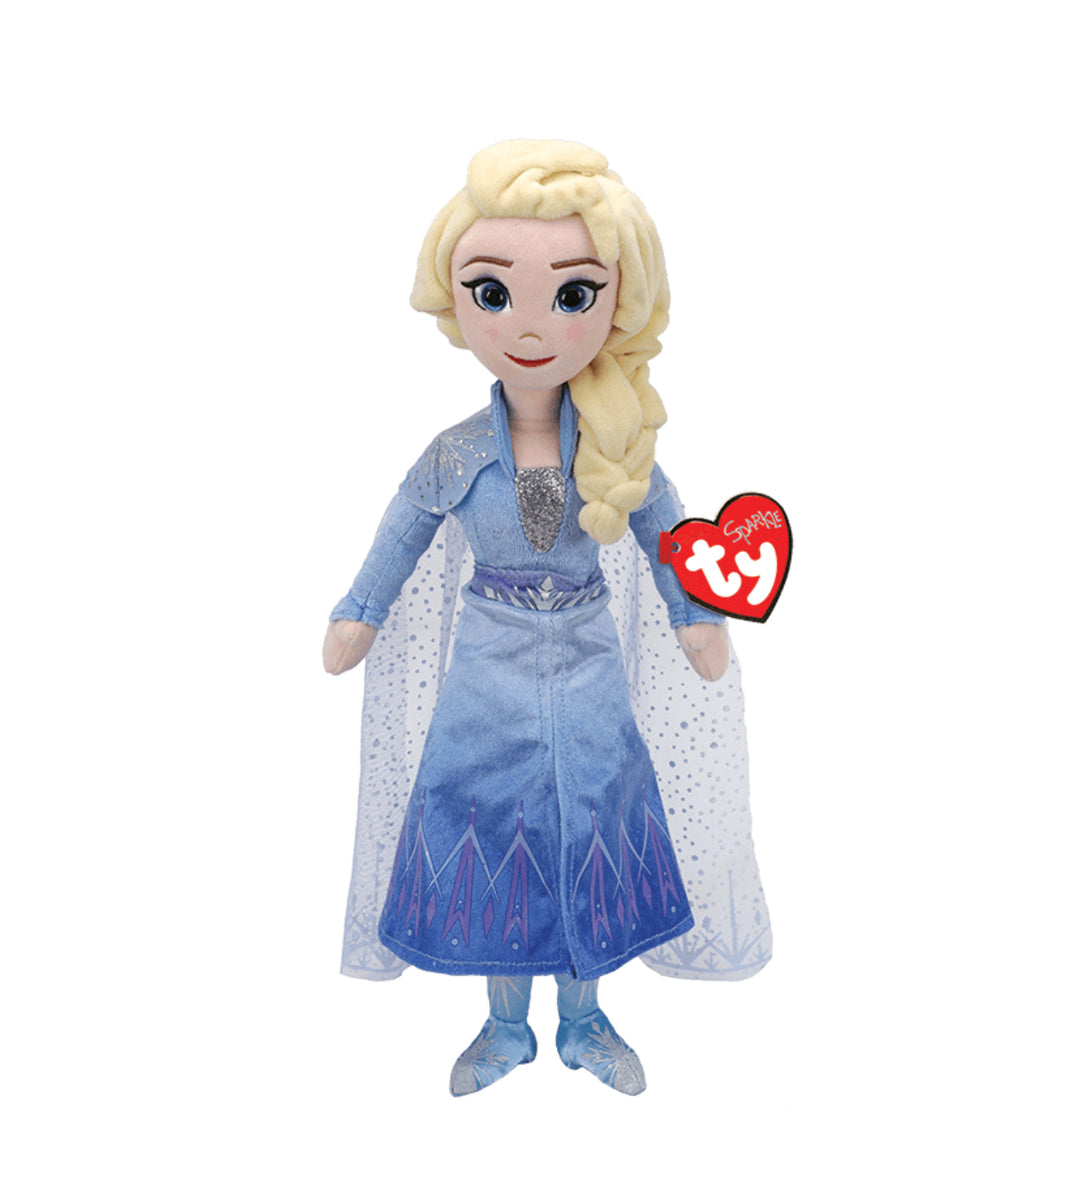 TY Disney Princess Stuffed Animal, Elsa-240 Kids-Inspired by Justeen-Women's Clothing Boutique in Chicago, Illinois